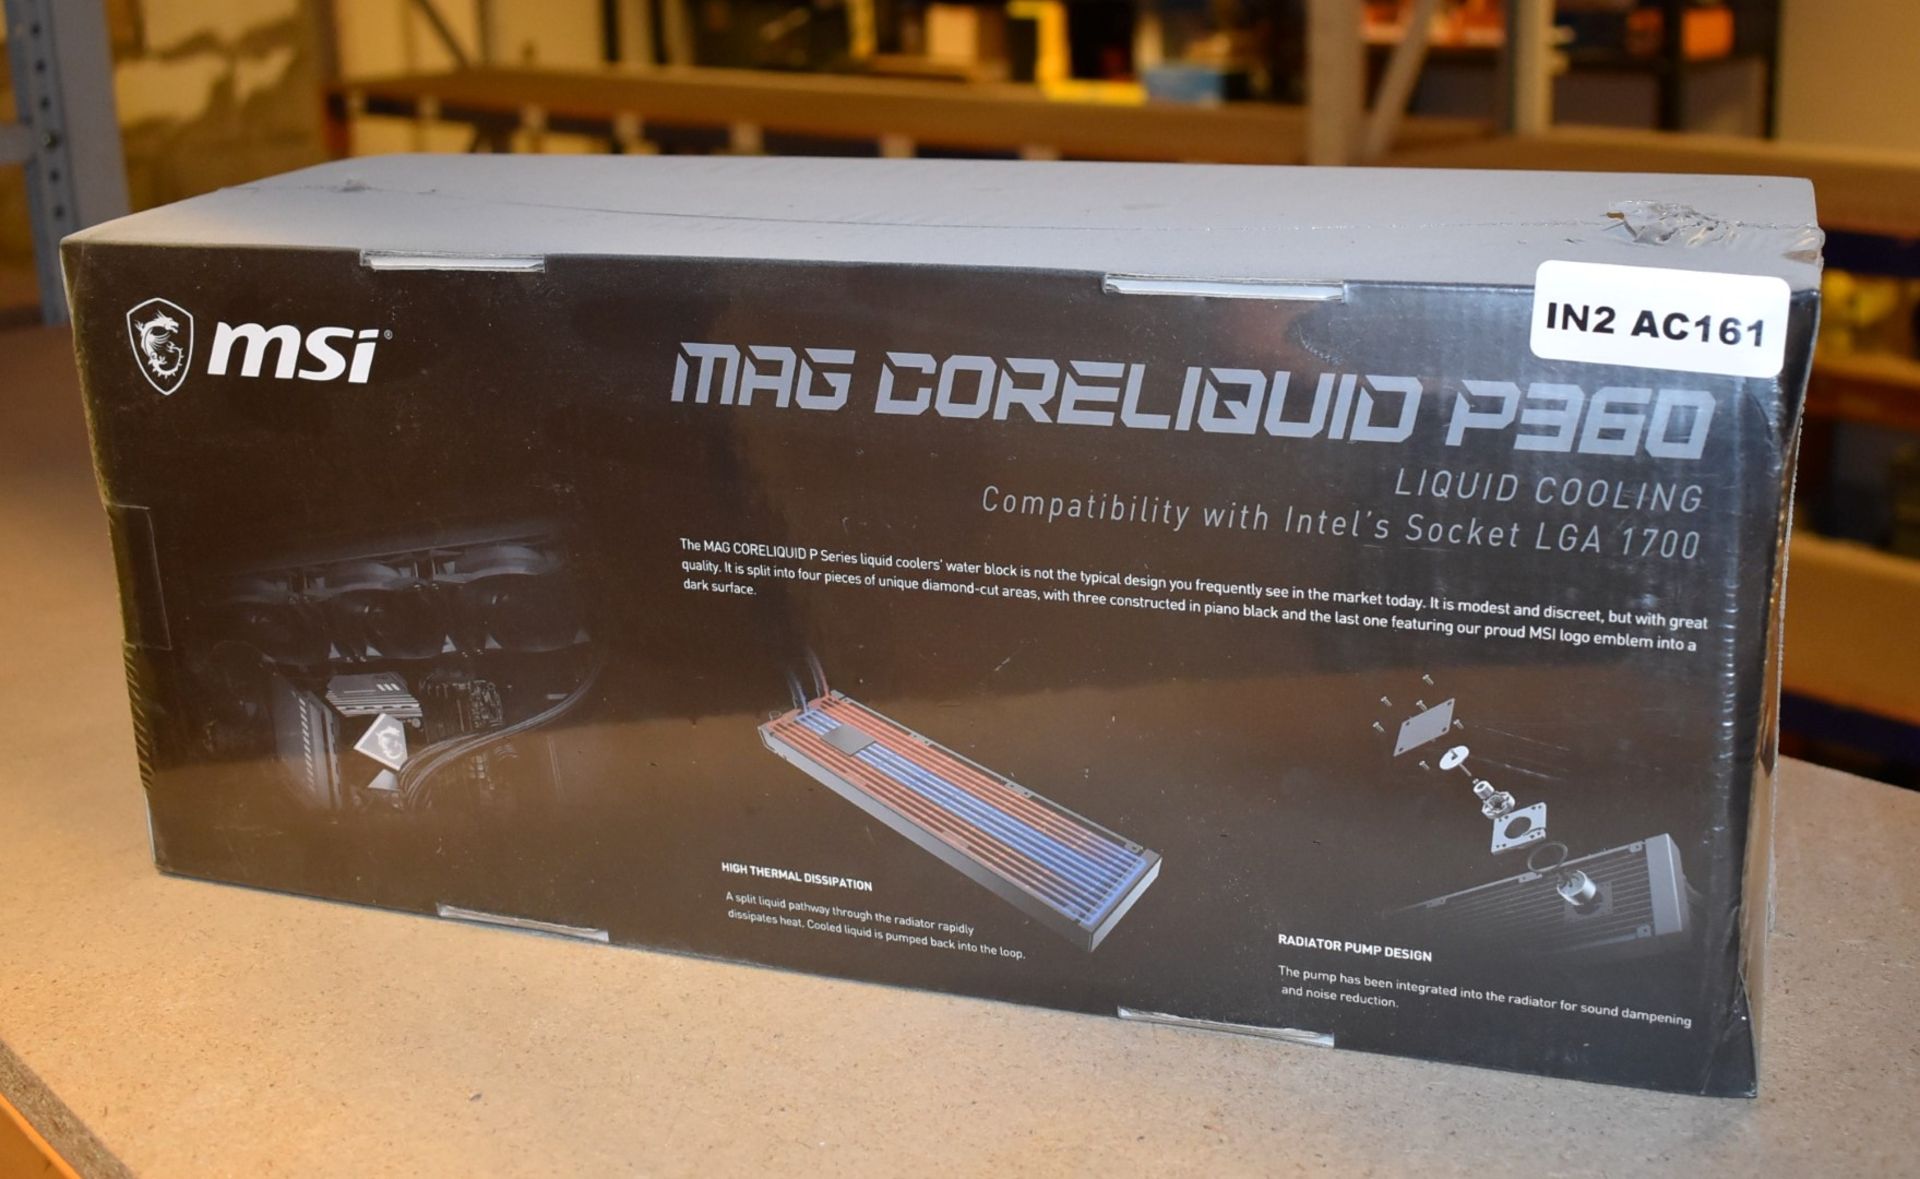 1 x MSI Mag Coreliquid P360 Liquid Cooling System - Triple RGB Fans - For Intel and AMD Processors - - Image 5 of 7